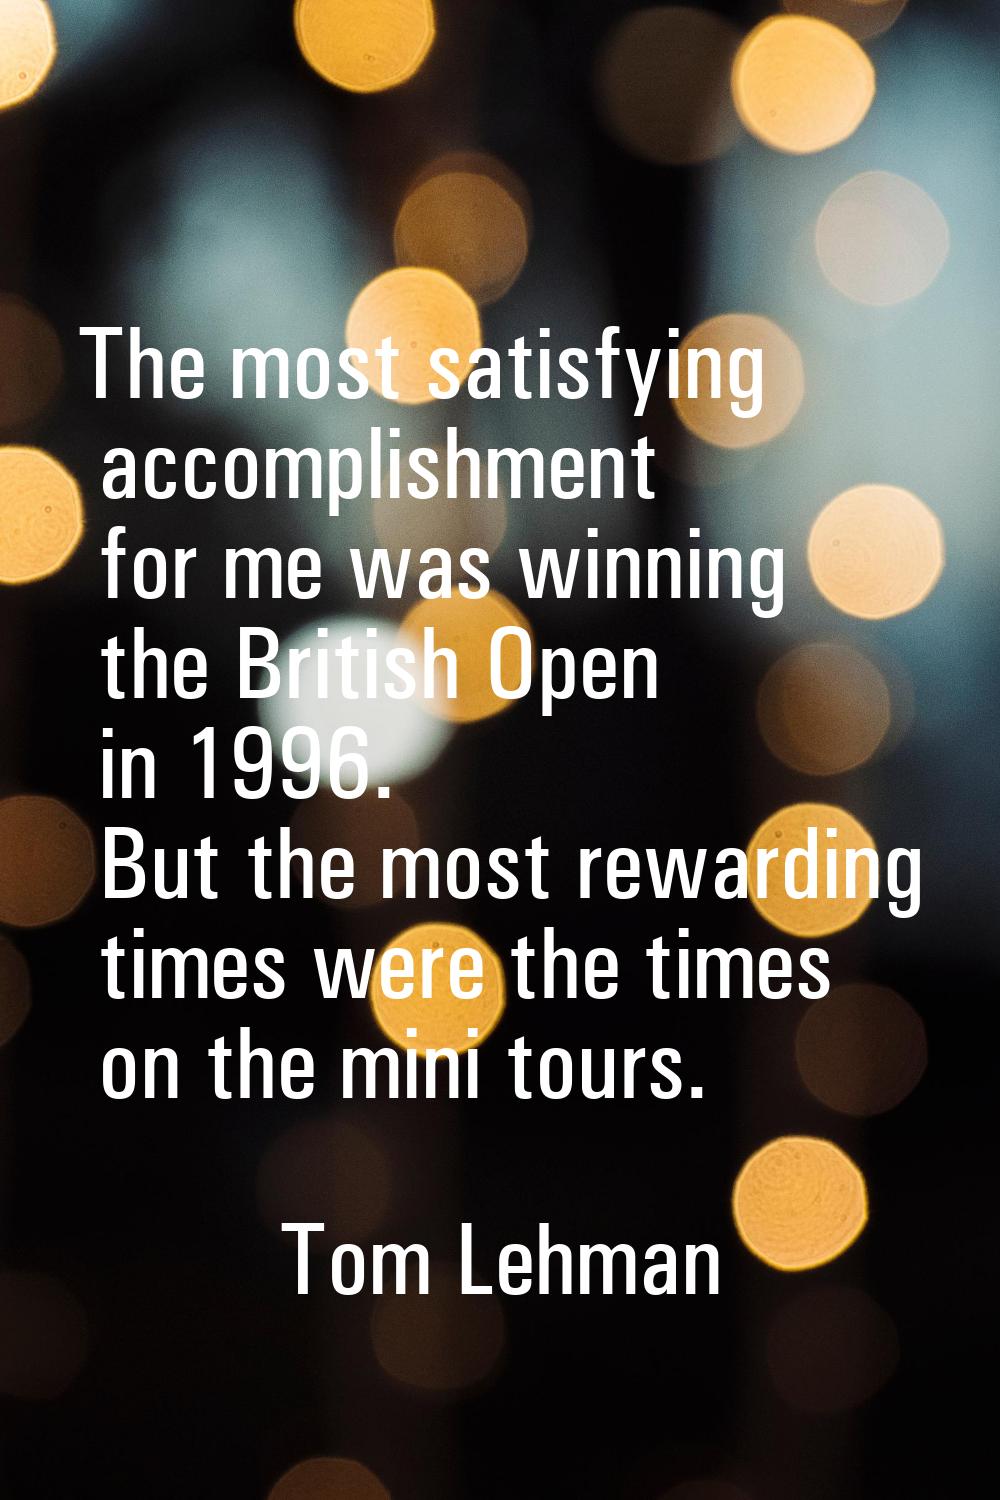 The most satisfying accomplishment for me was winning the British Open in 1996. But the most reward